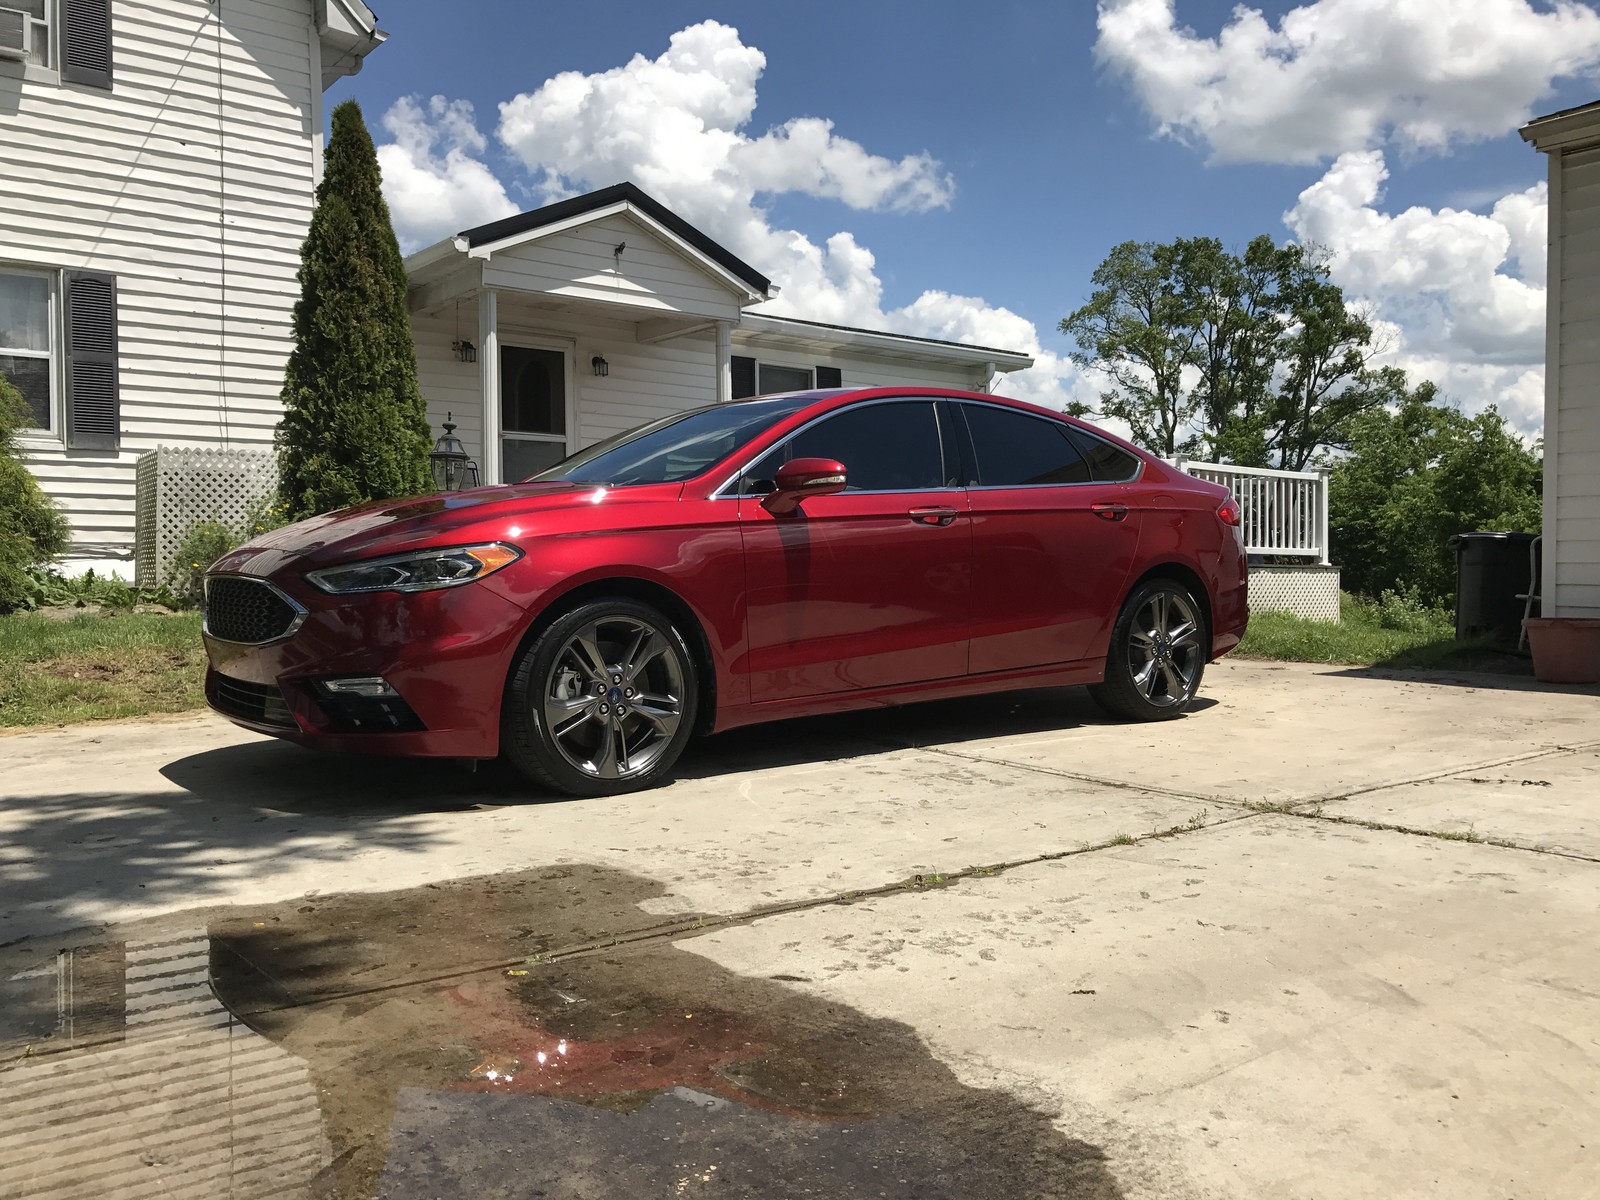 Ruby red 2017 Ford Fusion Sport